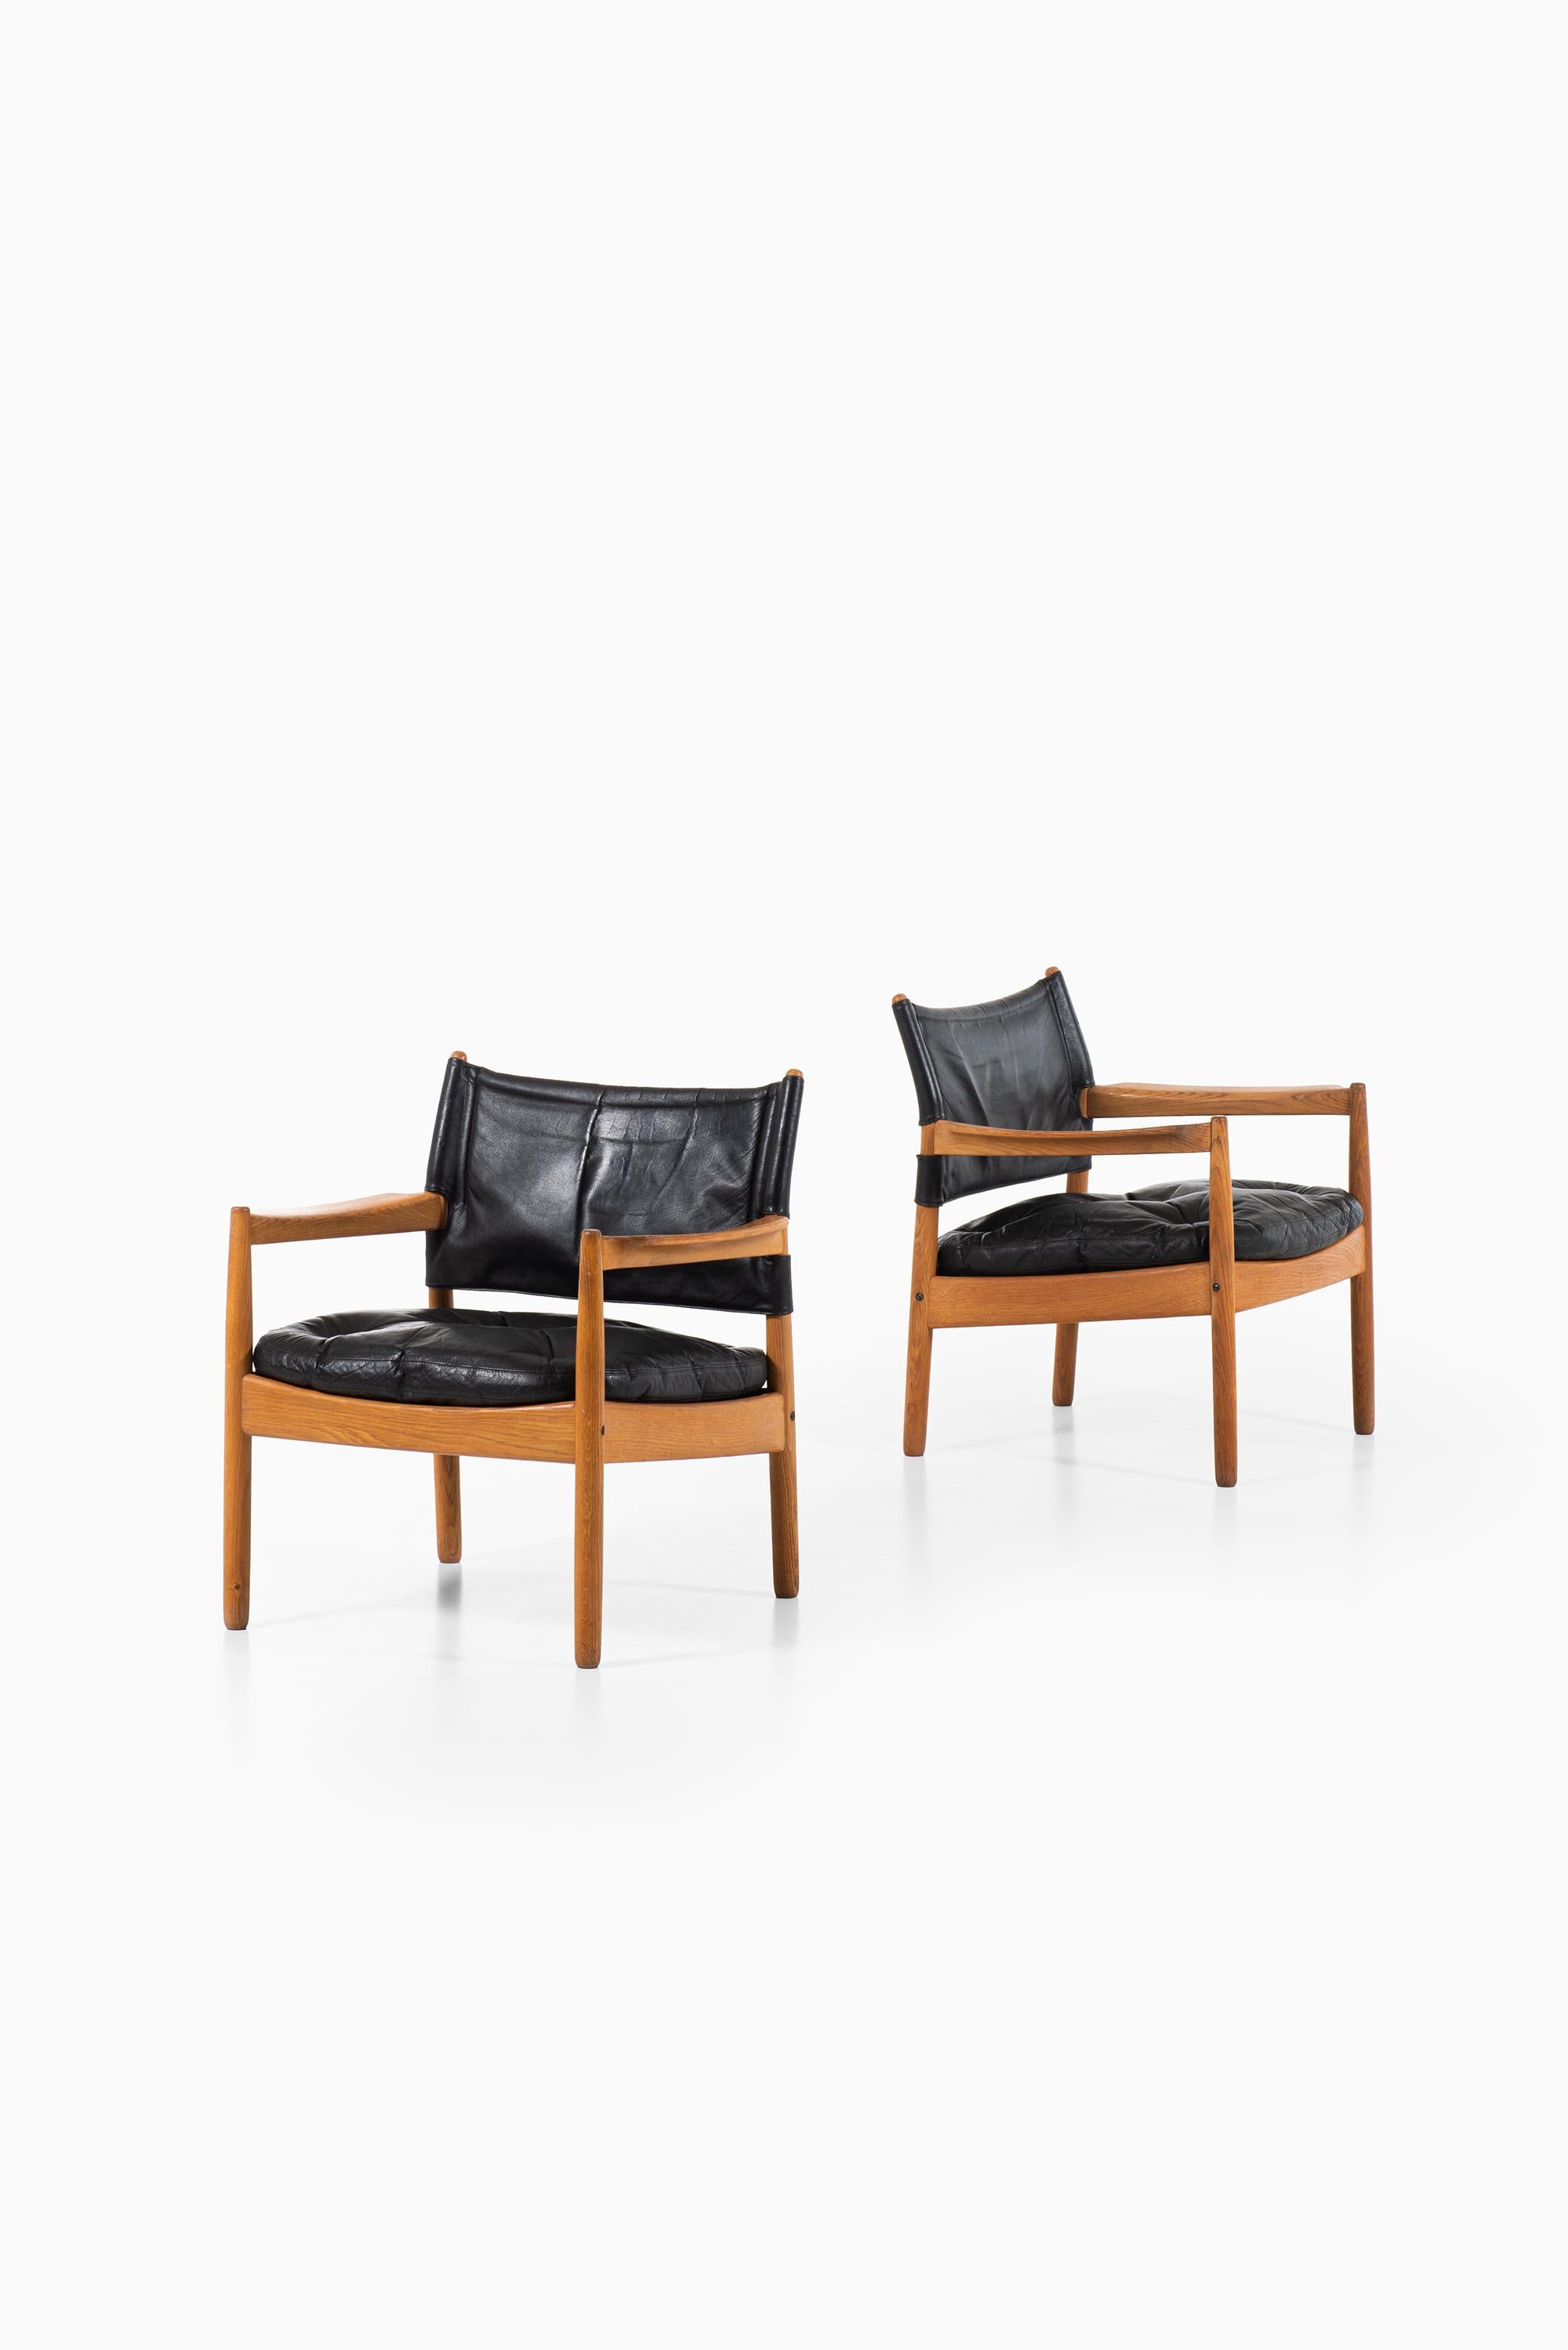 A pair of easy chairs designed by Gunnar Myrstrand. Produced by Källemo in Sweden.